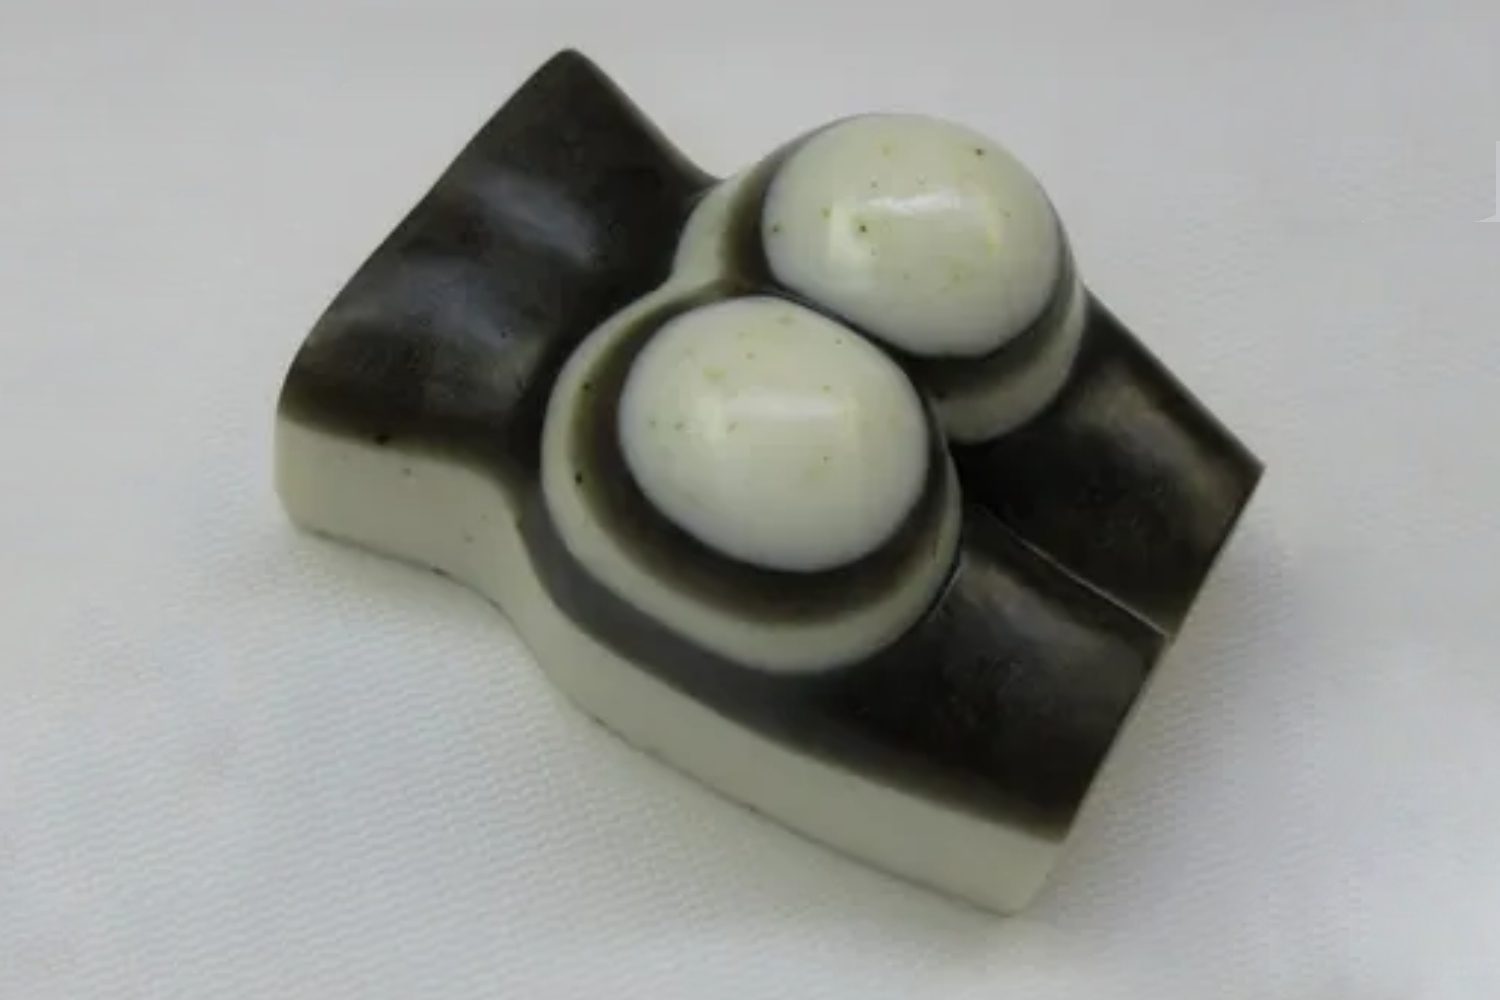 A white and black object with two candles on top.